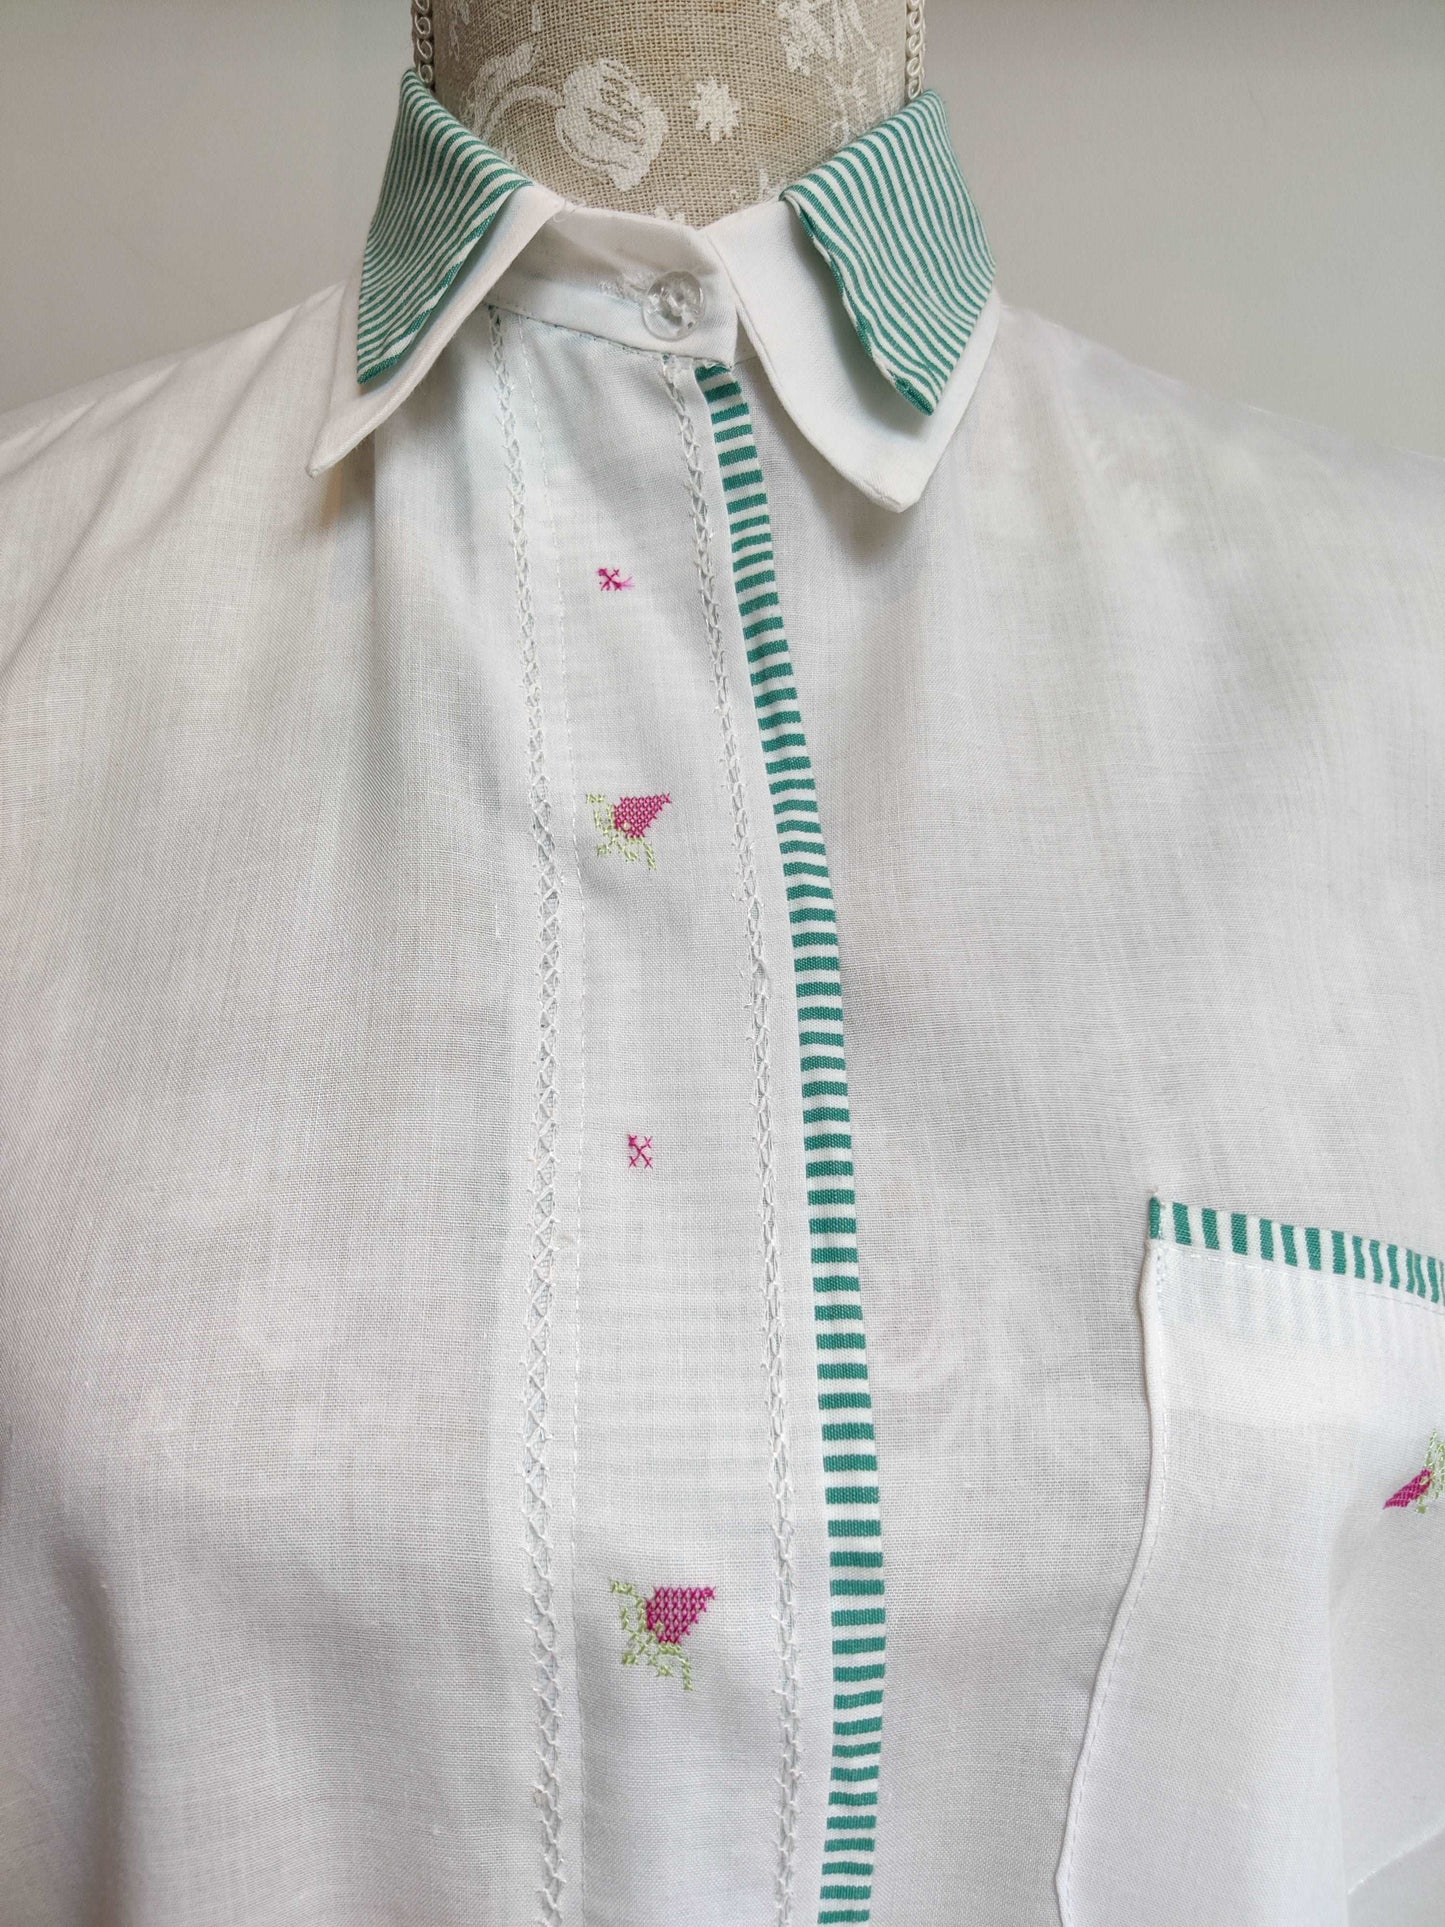 Vintage white blouse with green trim. 16